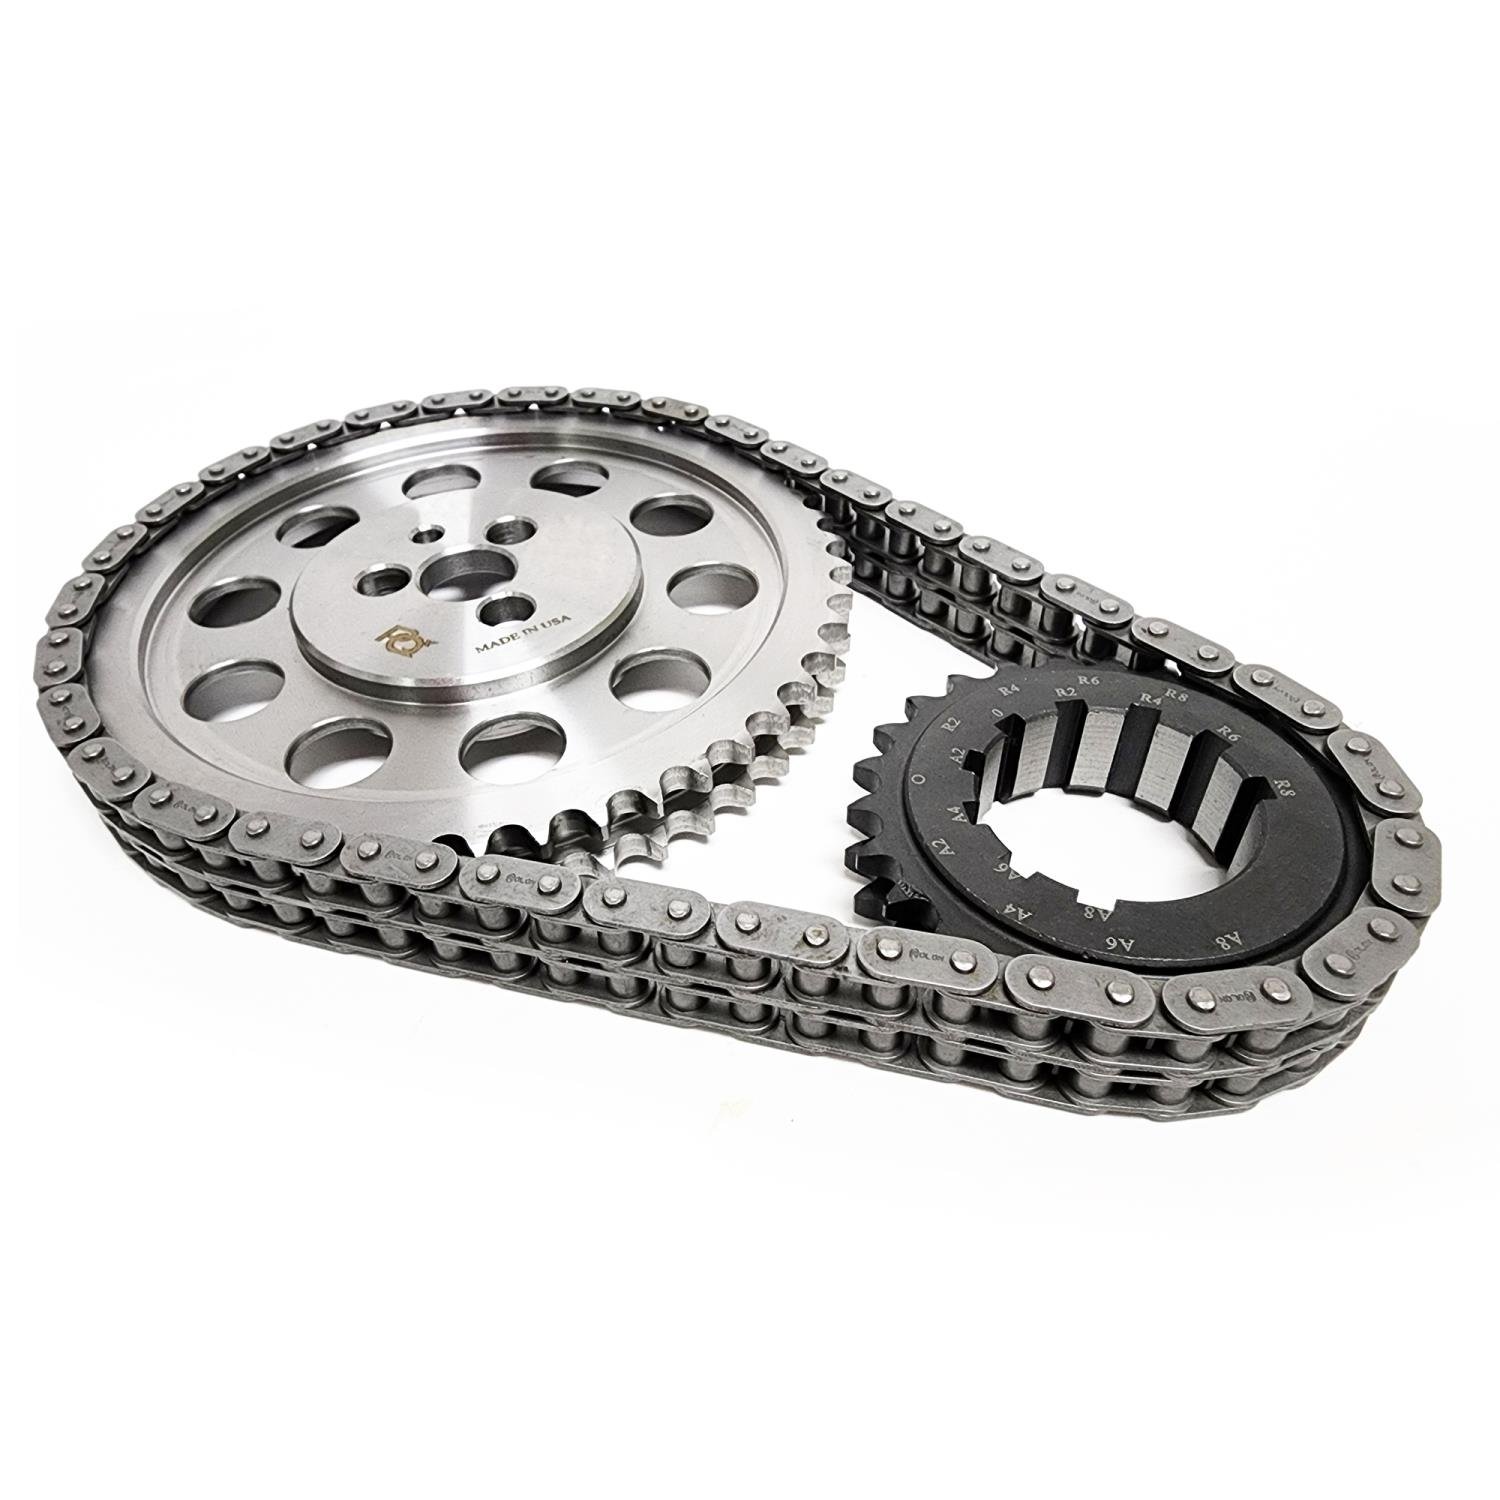 Double-Roller Timing Chain and Gear Set for Mopar 383/400/413/426/440 V8 with 1-Bolt Camshaft